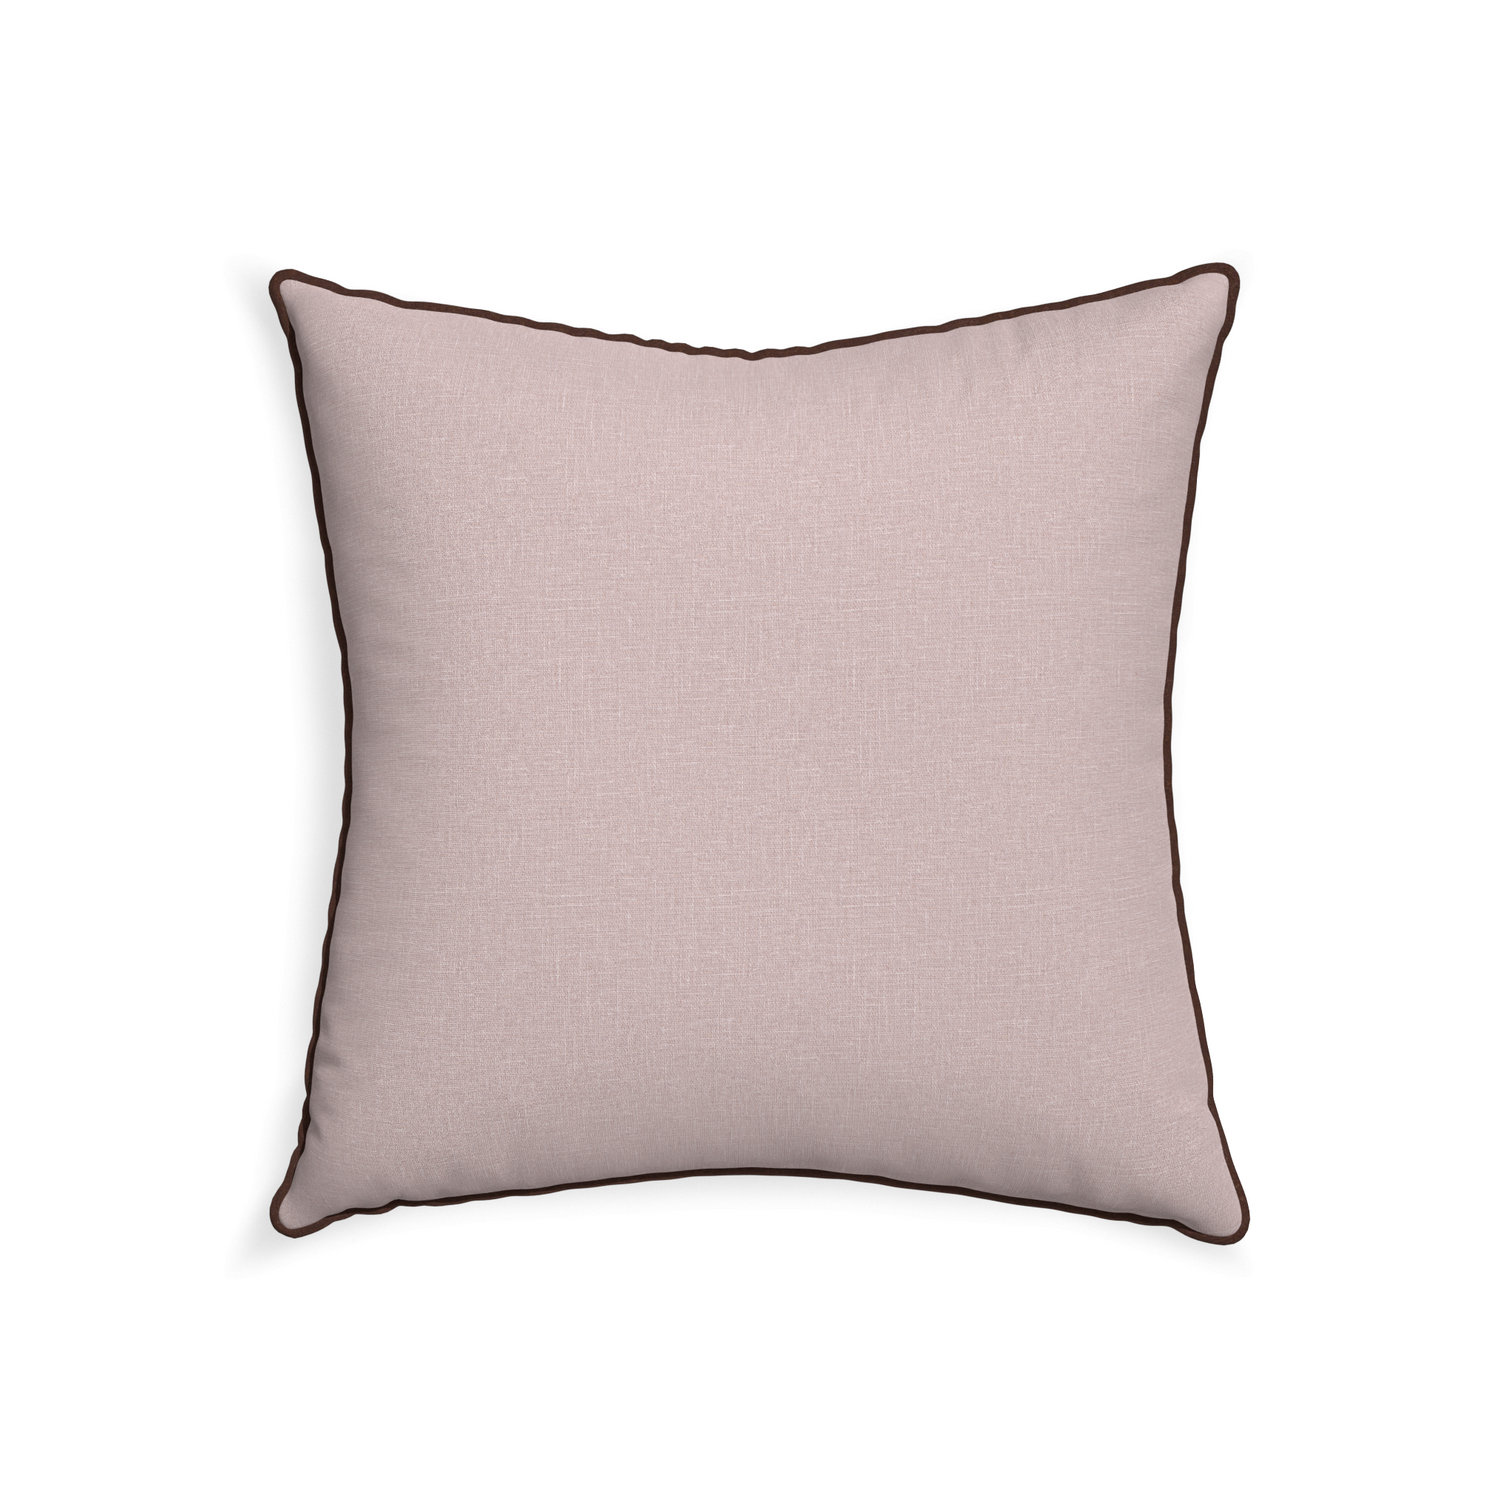 22-square orchid custom mauve pinkpillow with w piping on white background